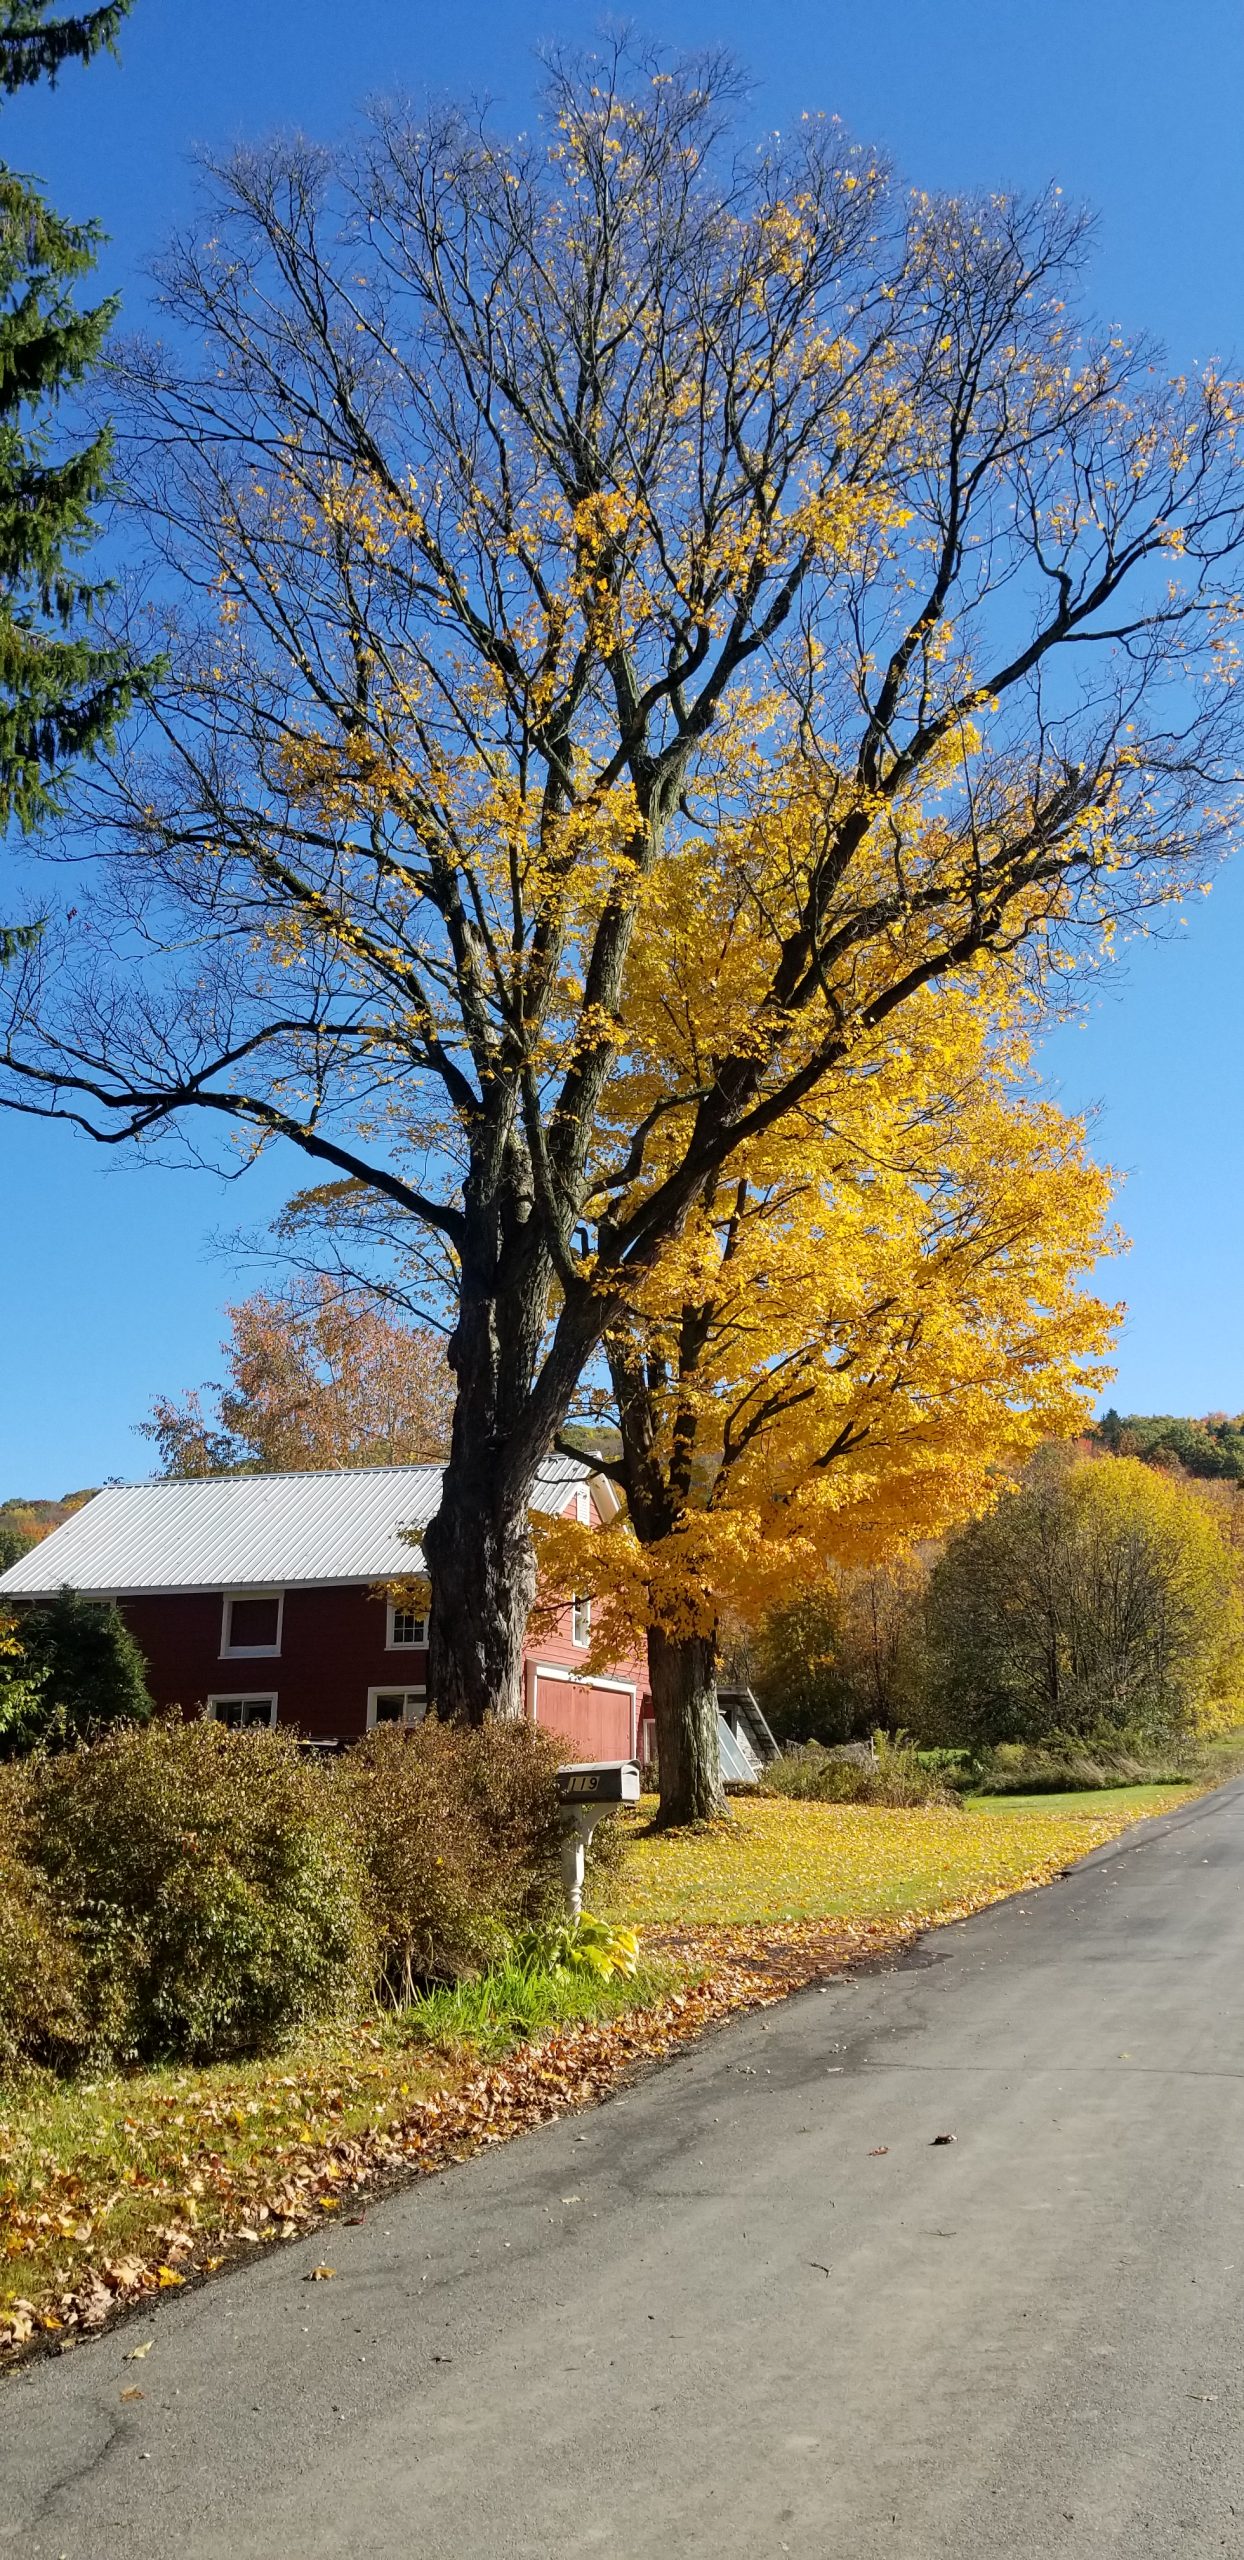 Photo of red barn and trees with fall foliage against a blue sky